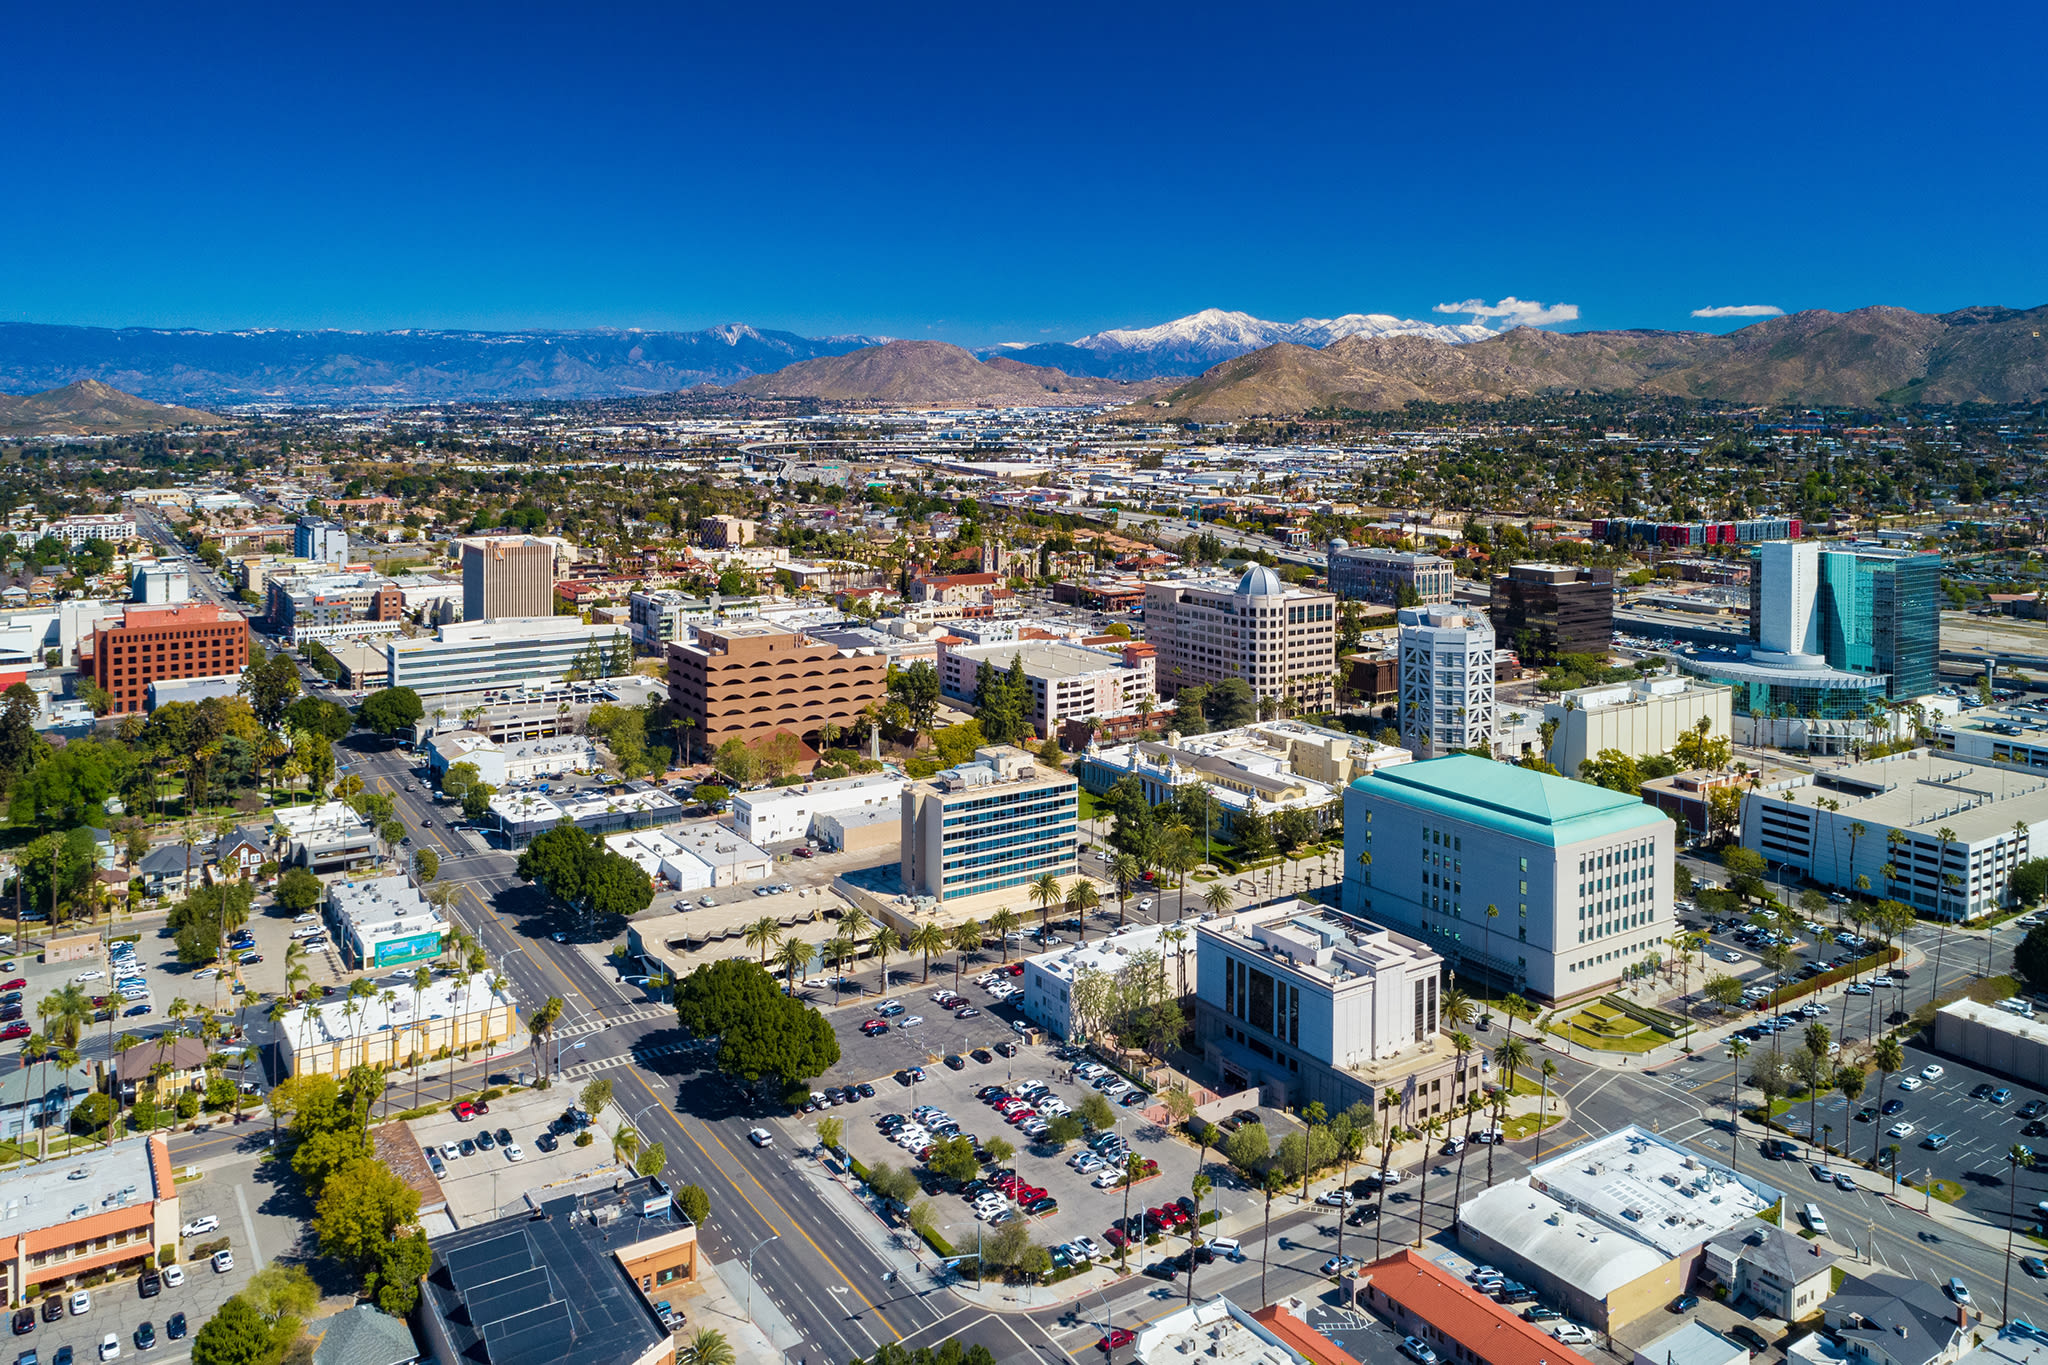 A population boom is reshaping this 'affordable' Calif. region